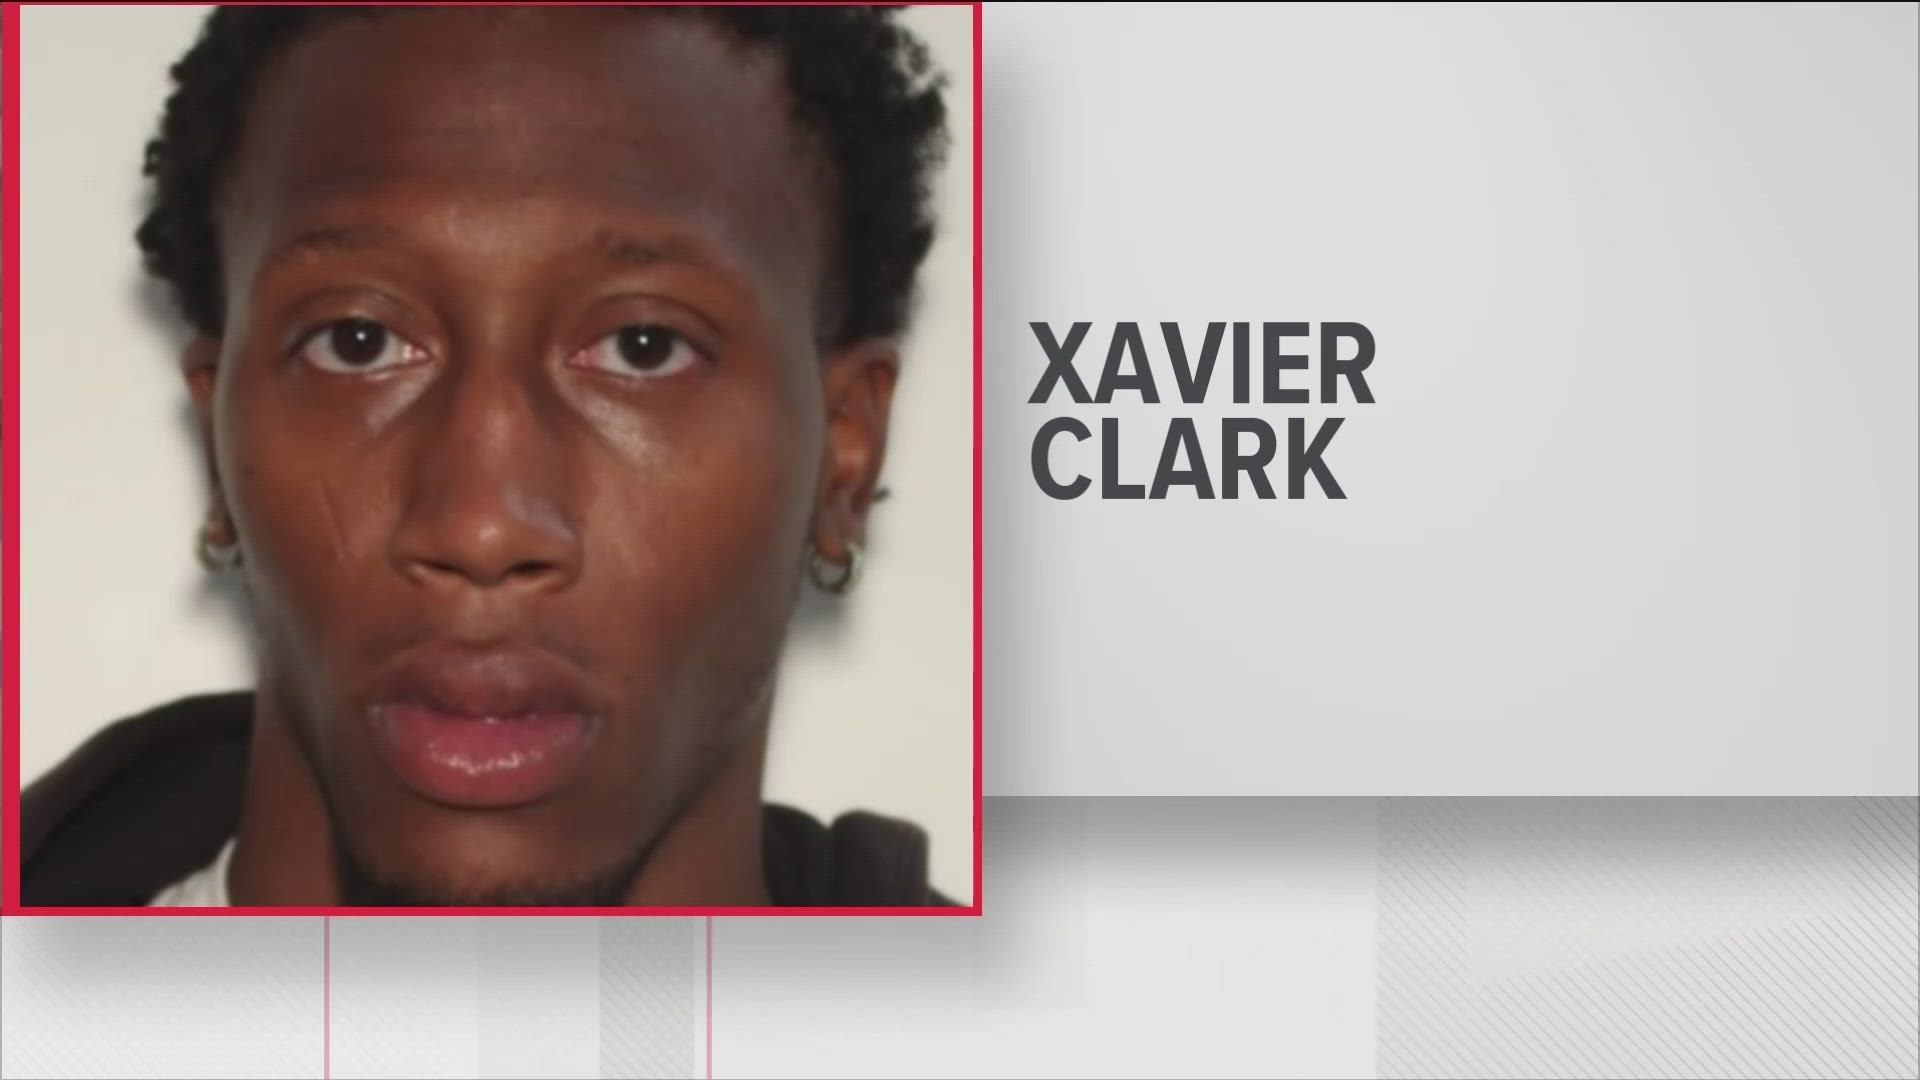 The sheriff's office said Monday morning Xavier Clark was arrested in the shooting death of Calvin Varnum.